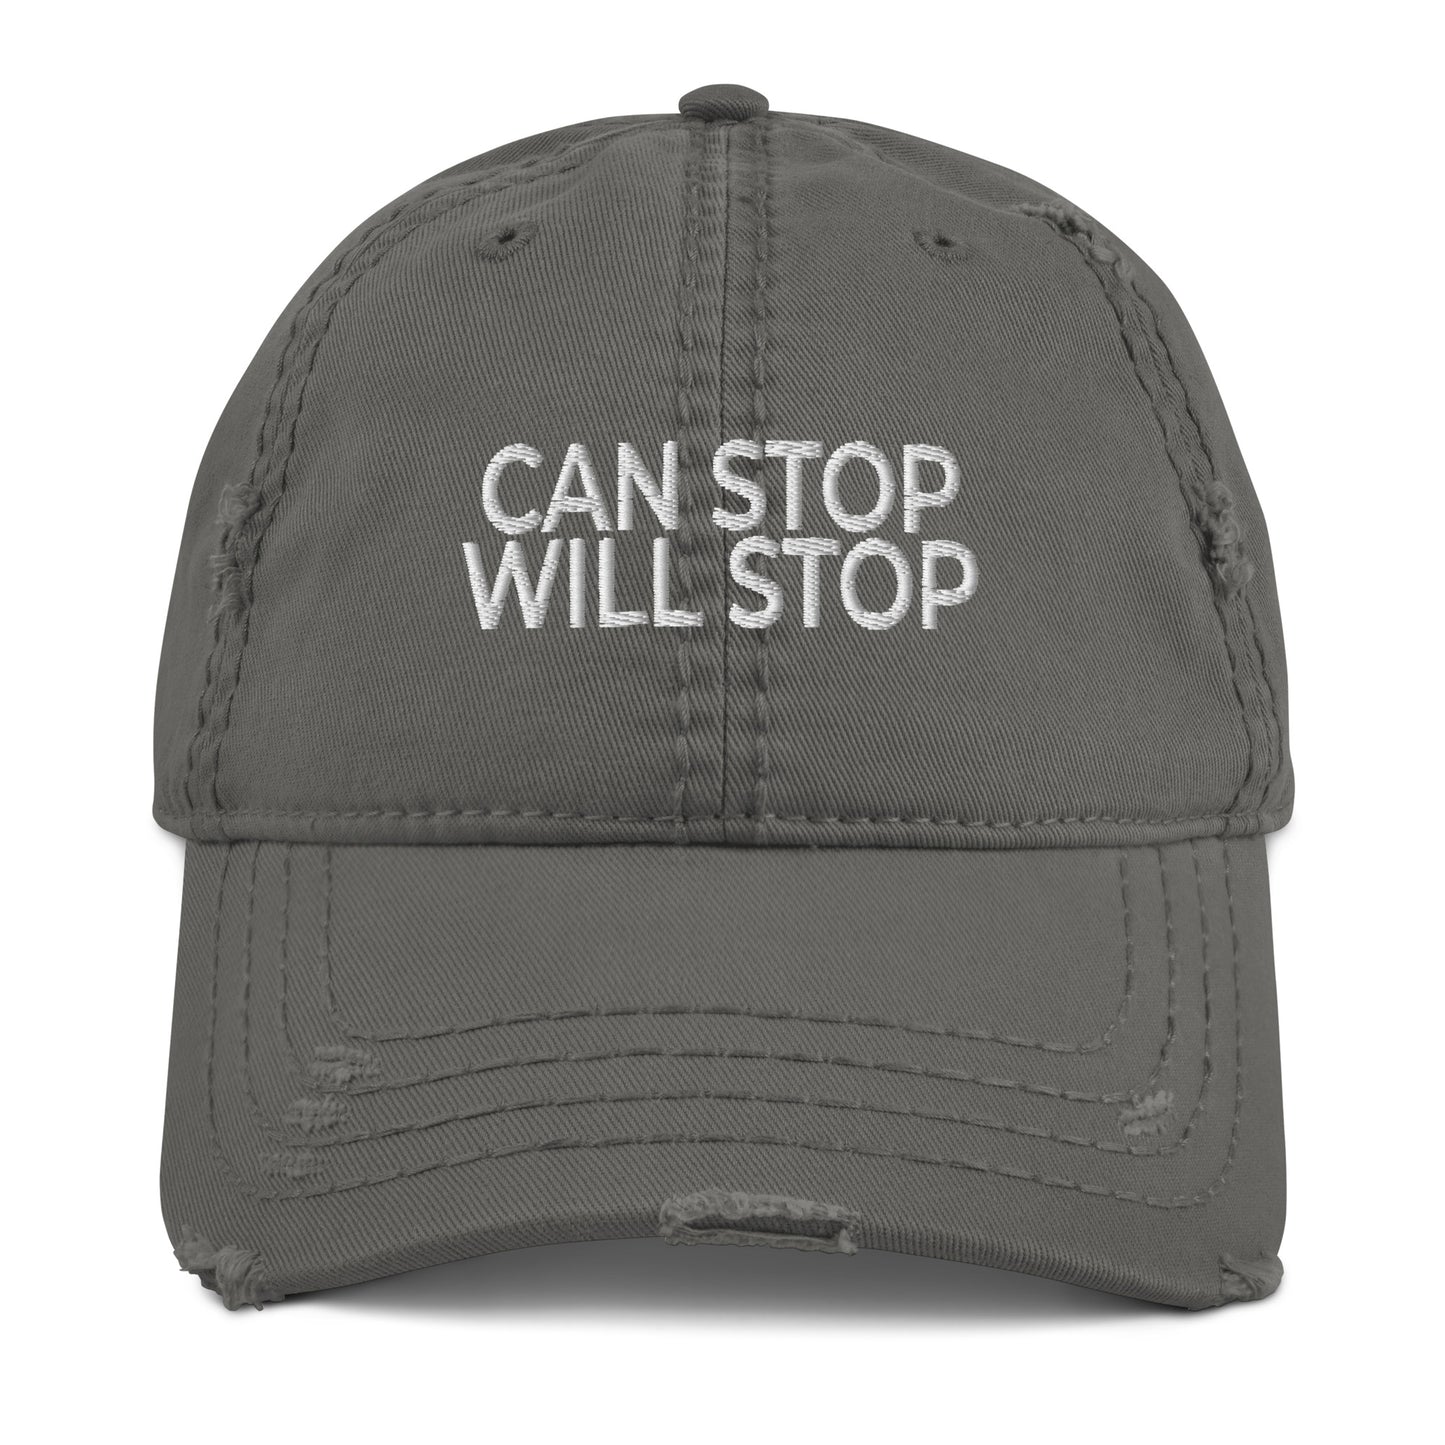 CAN STOP WILL STOP Distressed Dad Hat